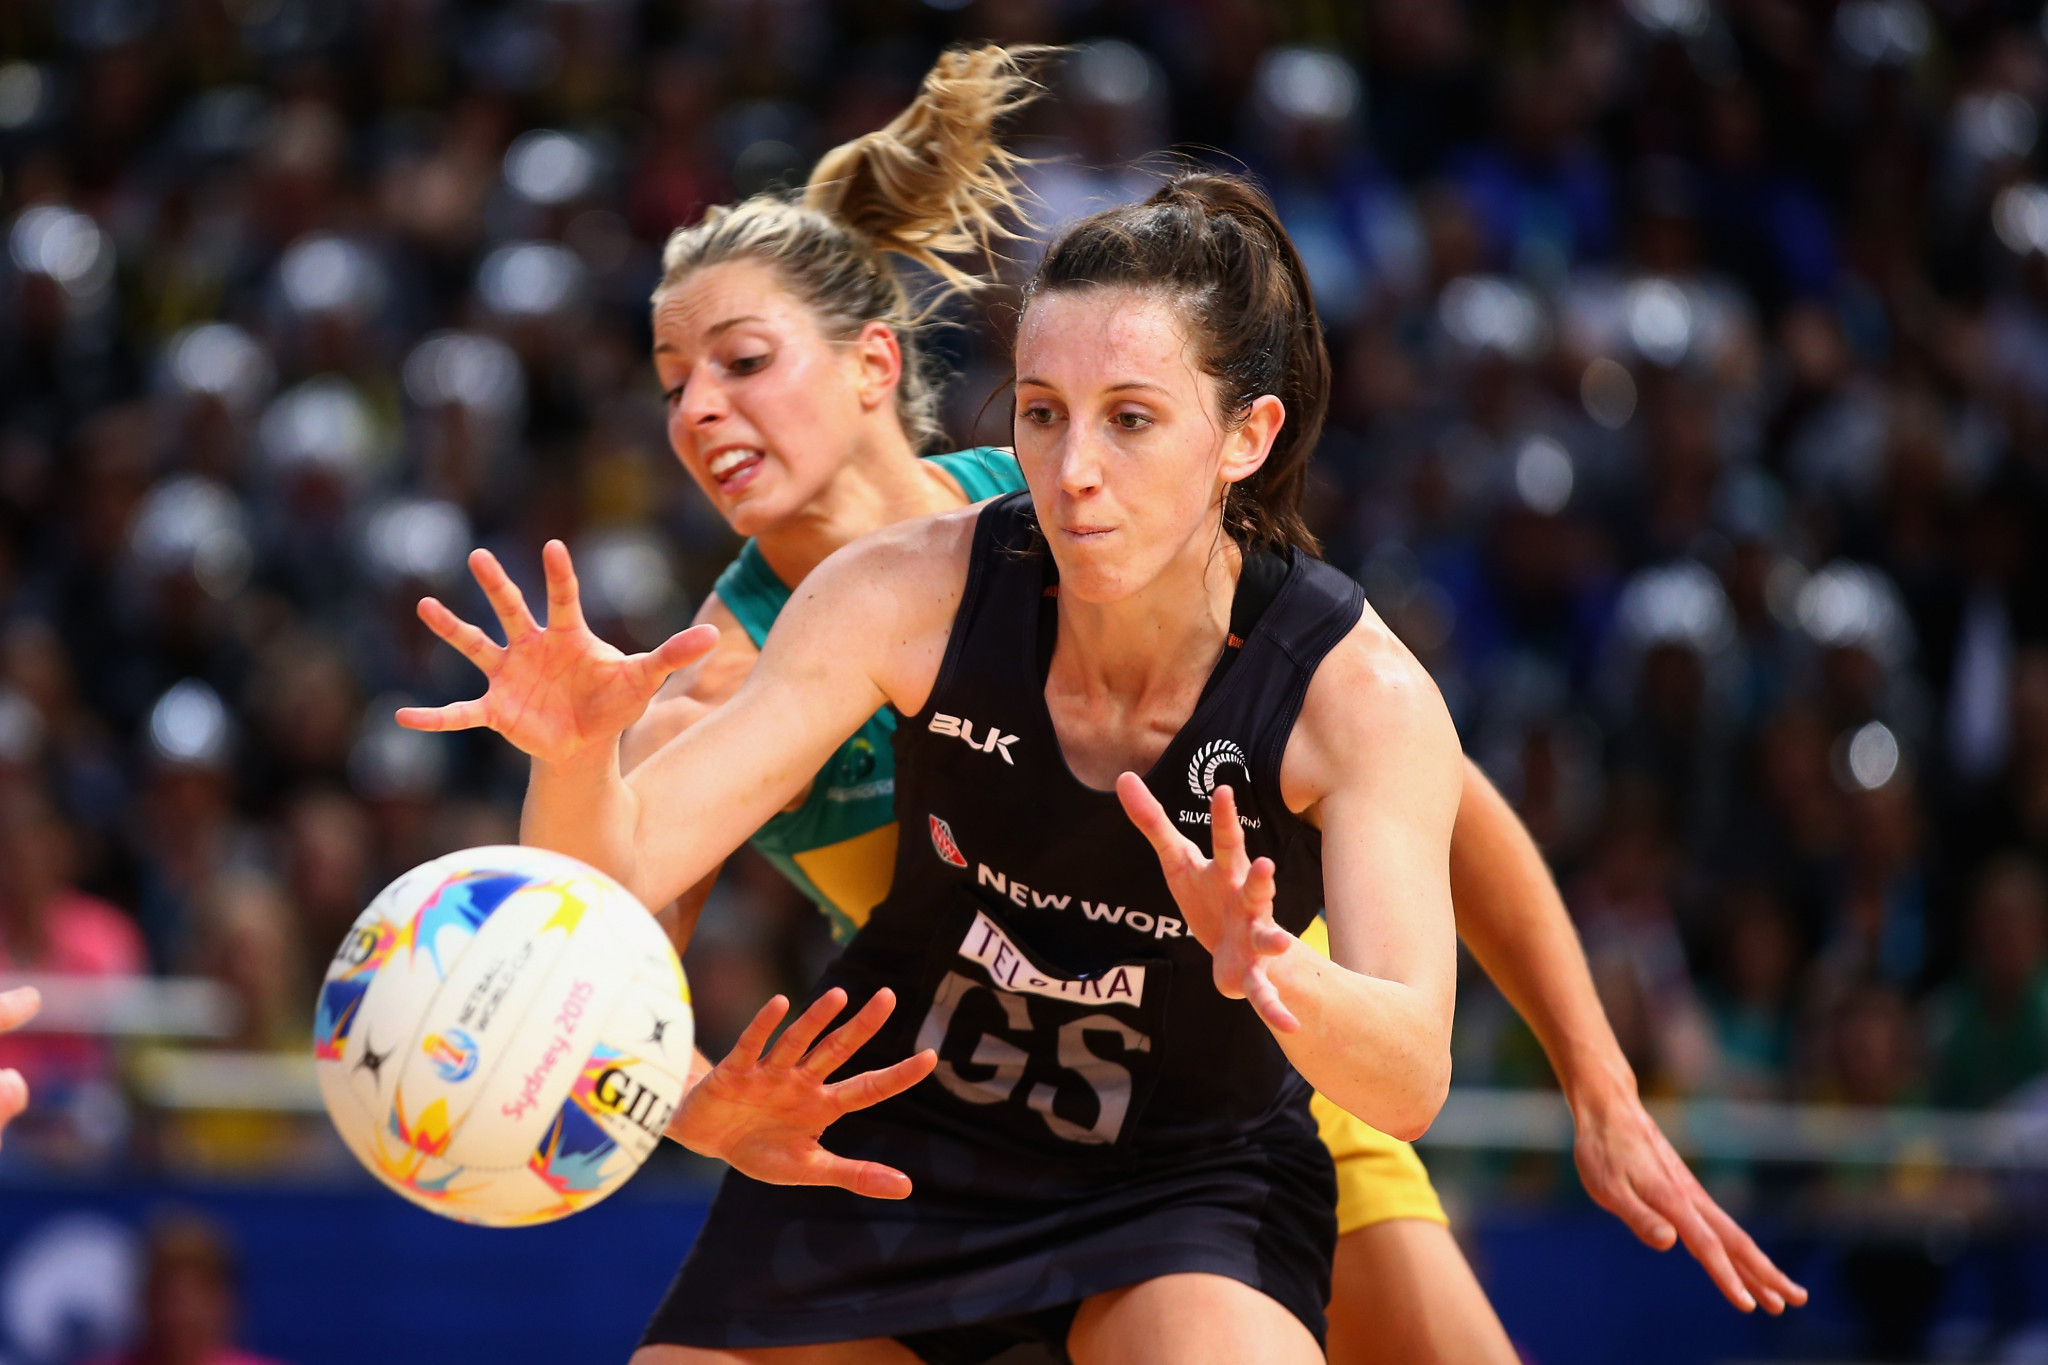 New Zealand will be aiming to lift the Netball World Cup for the first time in 16 years in Liverpool next year after finishing runners-up to Australia in the last three tournaments, including at Sydney in 2015 ©Getty Images